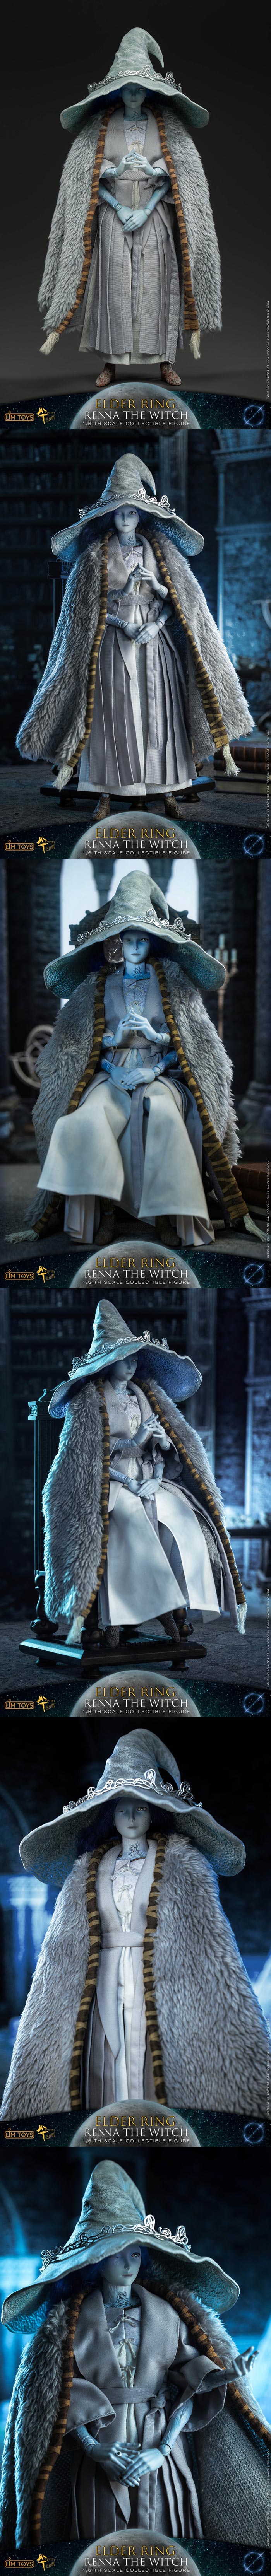 LIM TOYS x MTTOYS 1/6 Scale Renna the Witch Figure